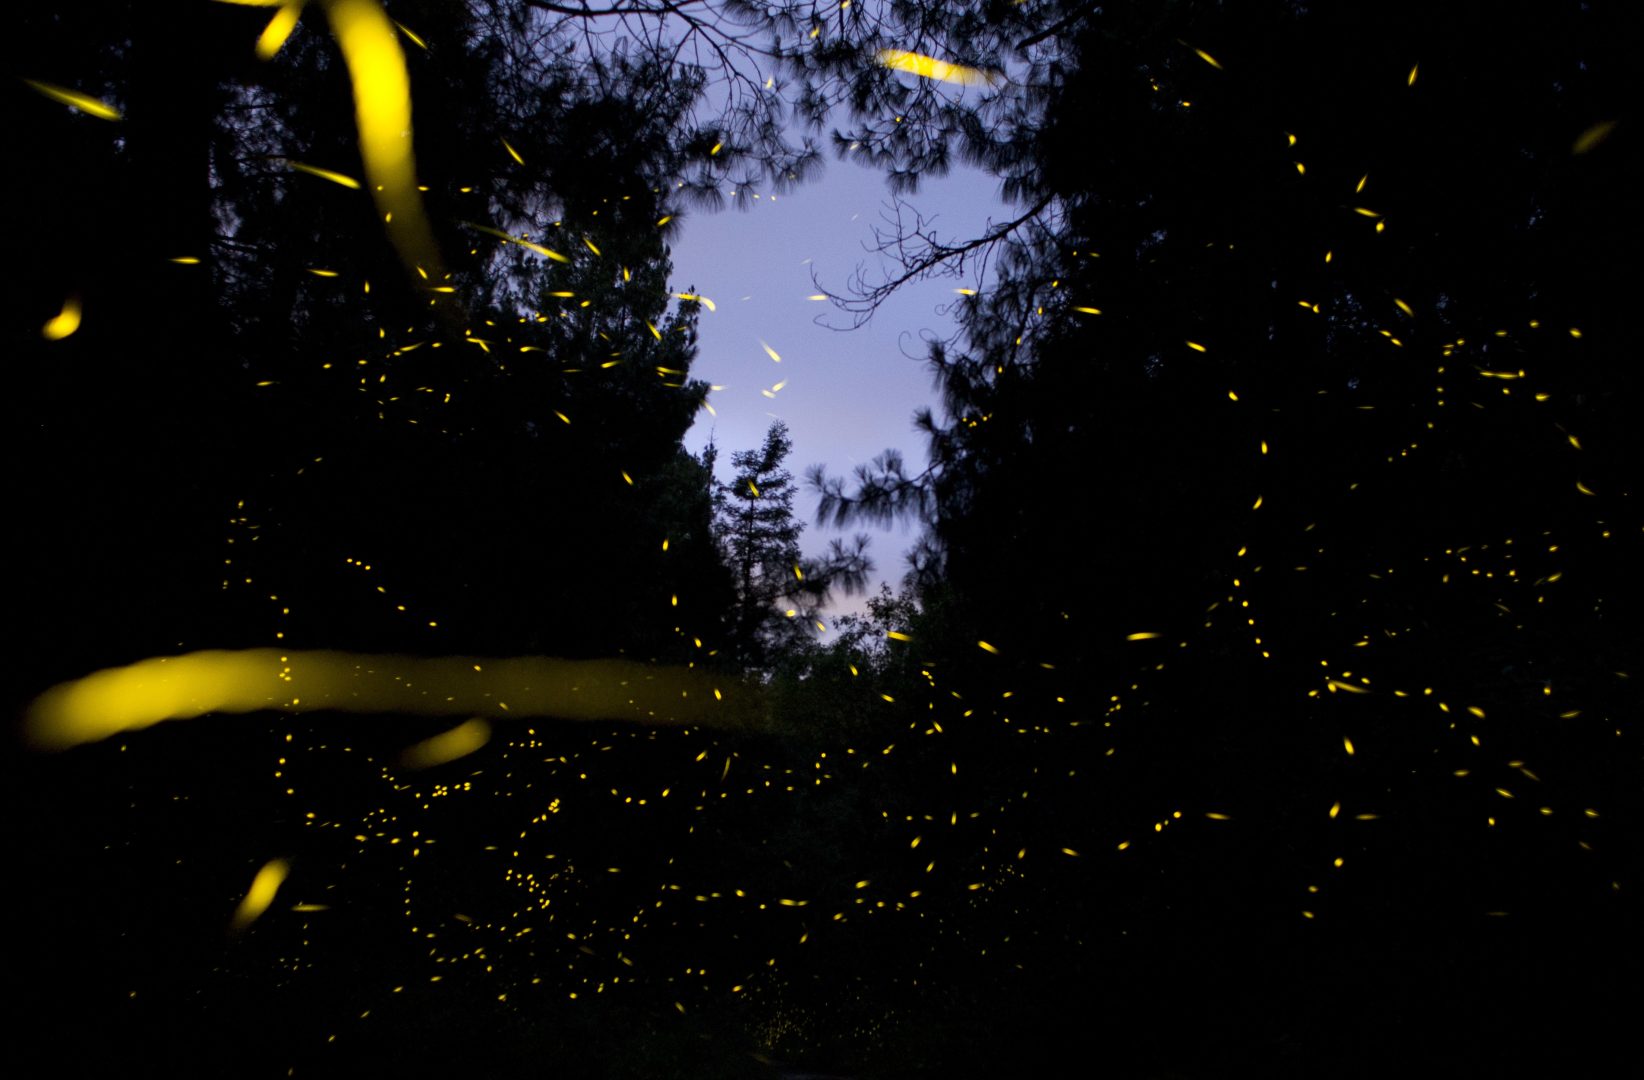 In this July 22, 2016 photo, fireflies light up a forest path inside Santa Clara Firefly Sanctuary, near Nanacamilpa, Tlaxcala state, Mexico. The fireflies appear in numbers between 8:30 and 9:30p.m. each night during the two-month season. At times, hundreds of the bioluminescent beetles will synchronize their lights, blinking on and off in perfect rhythm. 